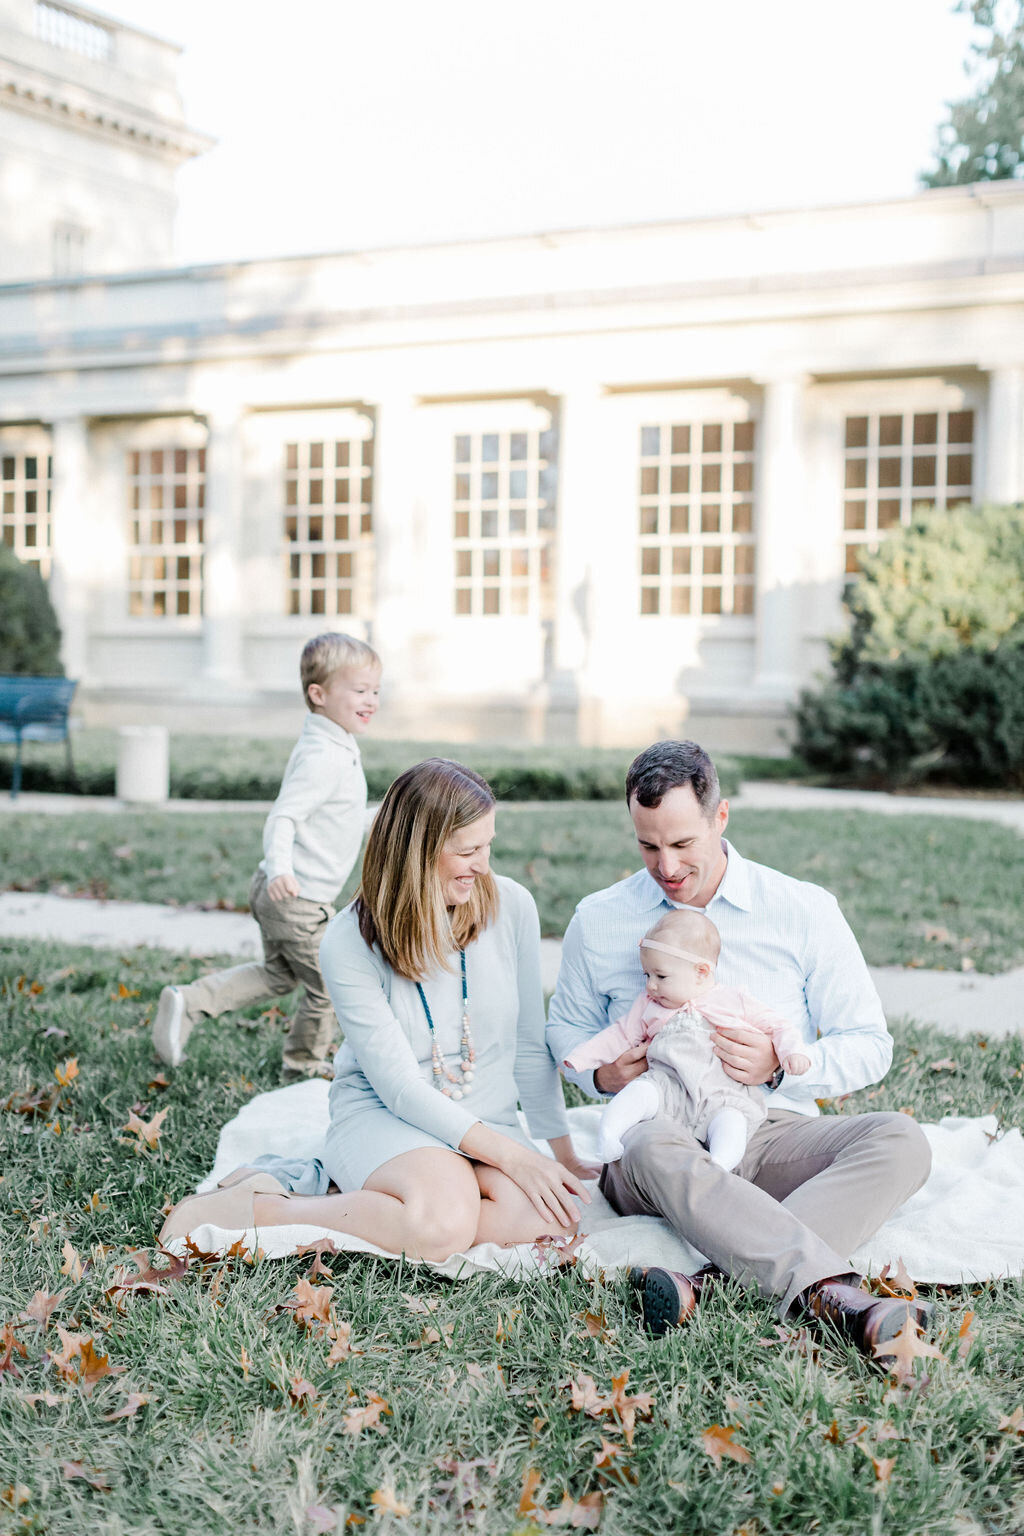 A sweet family moment captured on film during a fall mini session at the VMFA in Richmond, Virginia